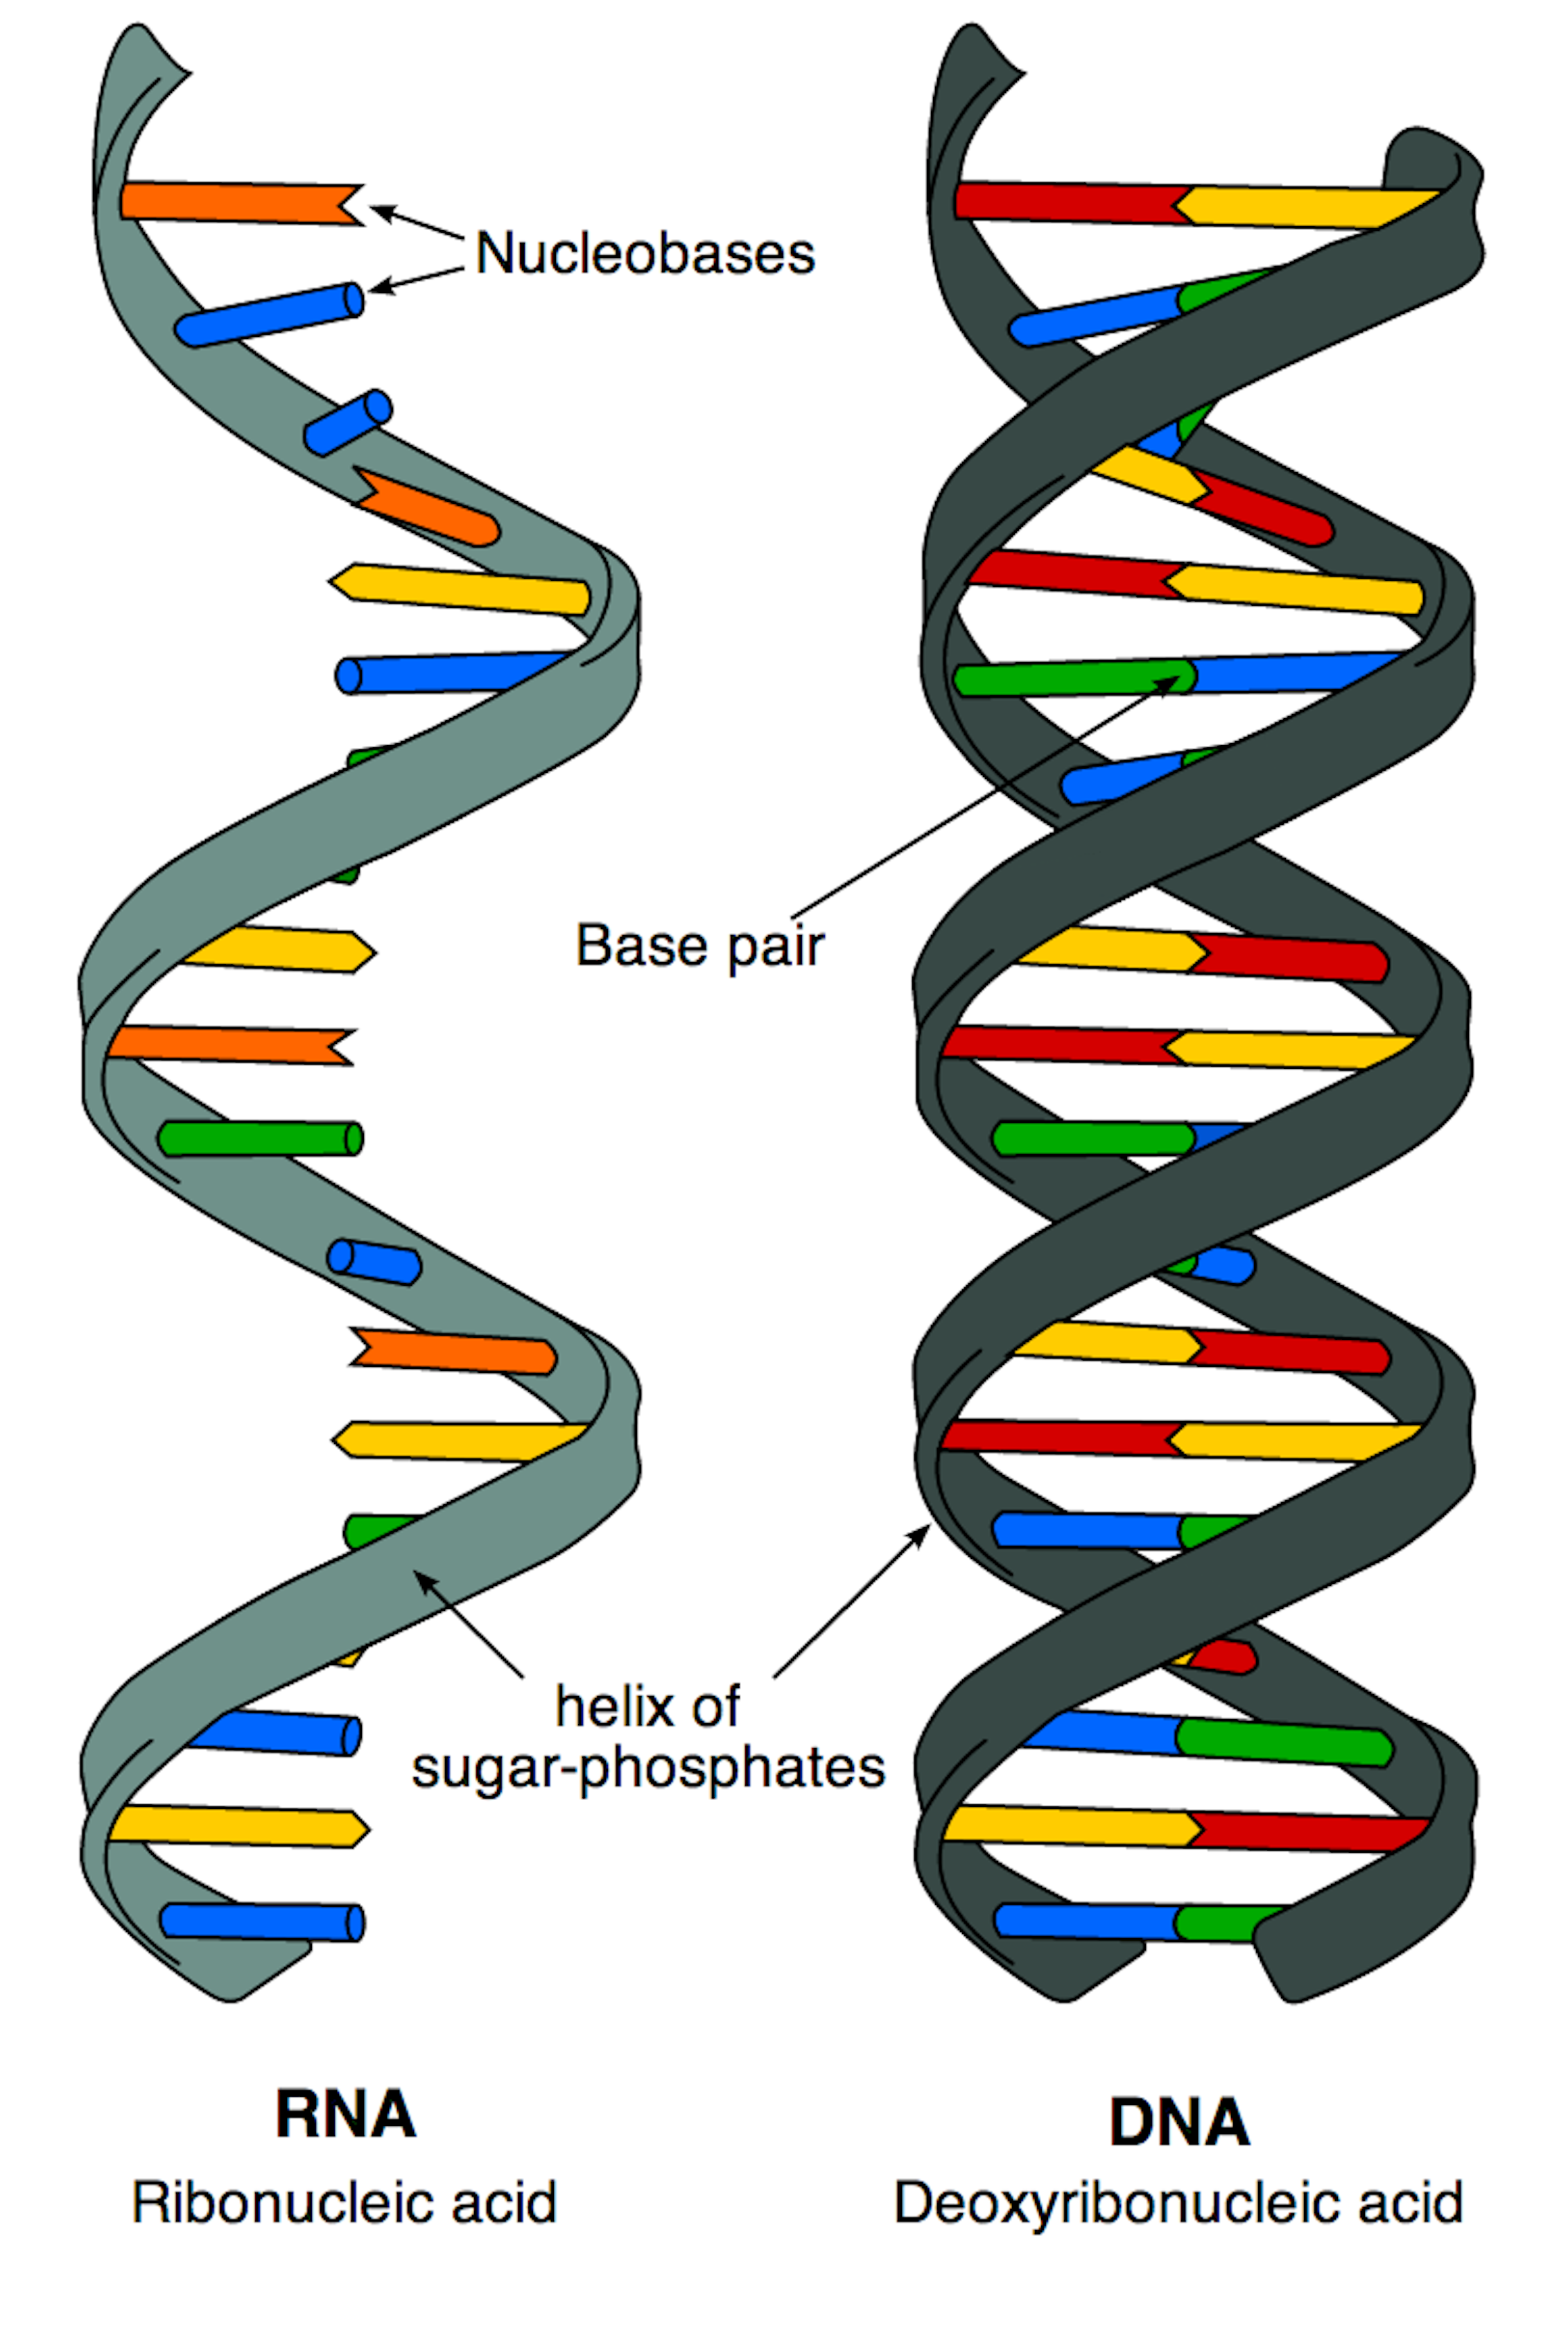 Explainer what is RNA?